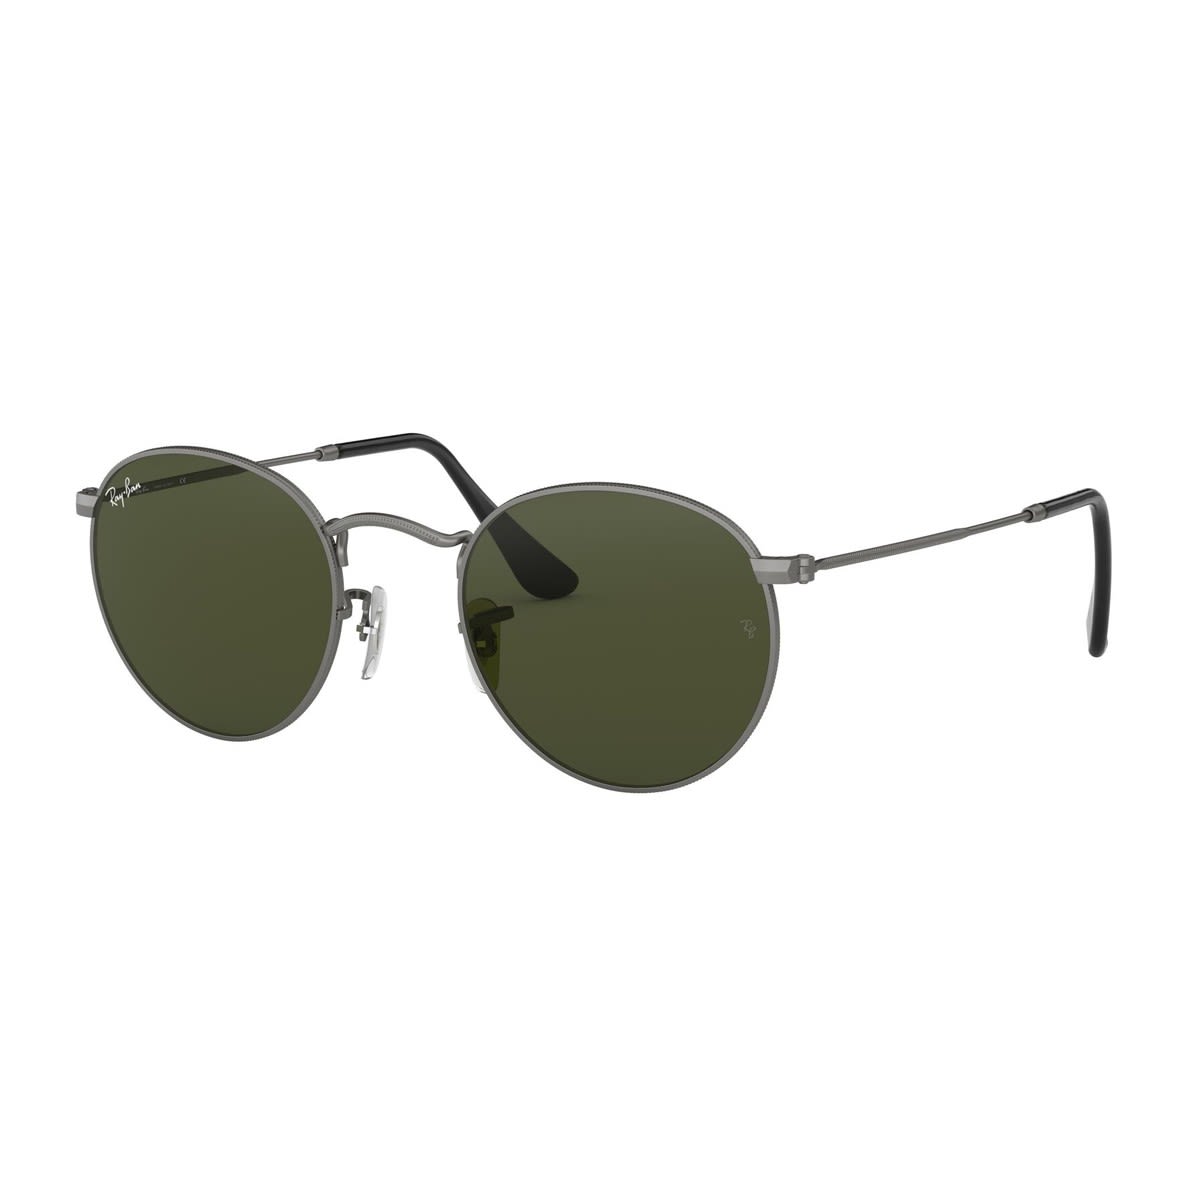 Ray-Ban Round Metal Rb 3447 Sunglasses - Argento - unisex - Size: 0one size